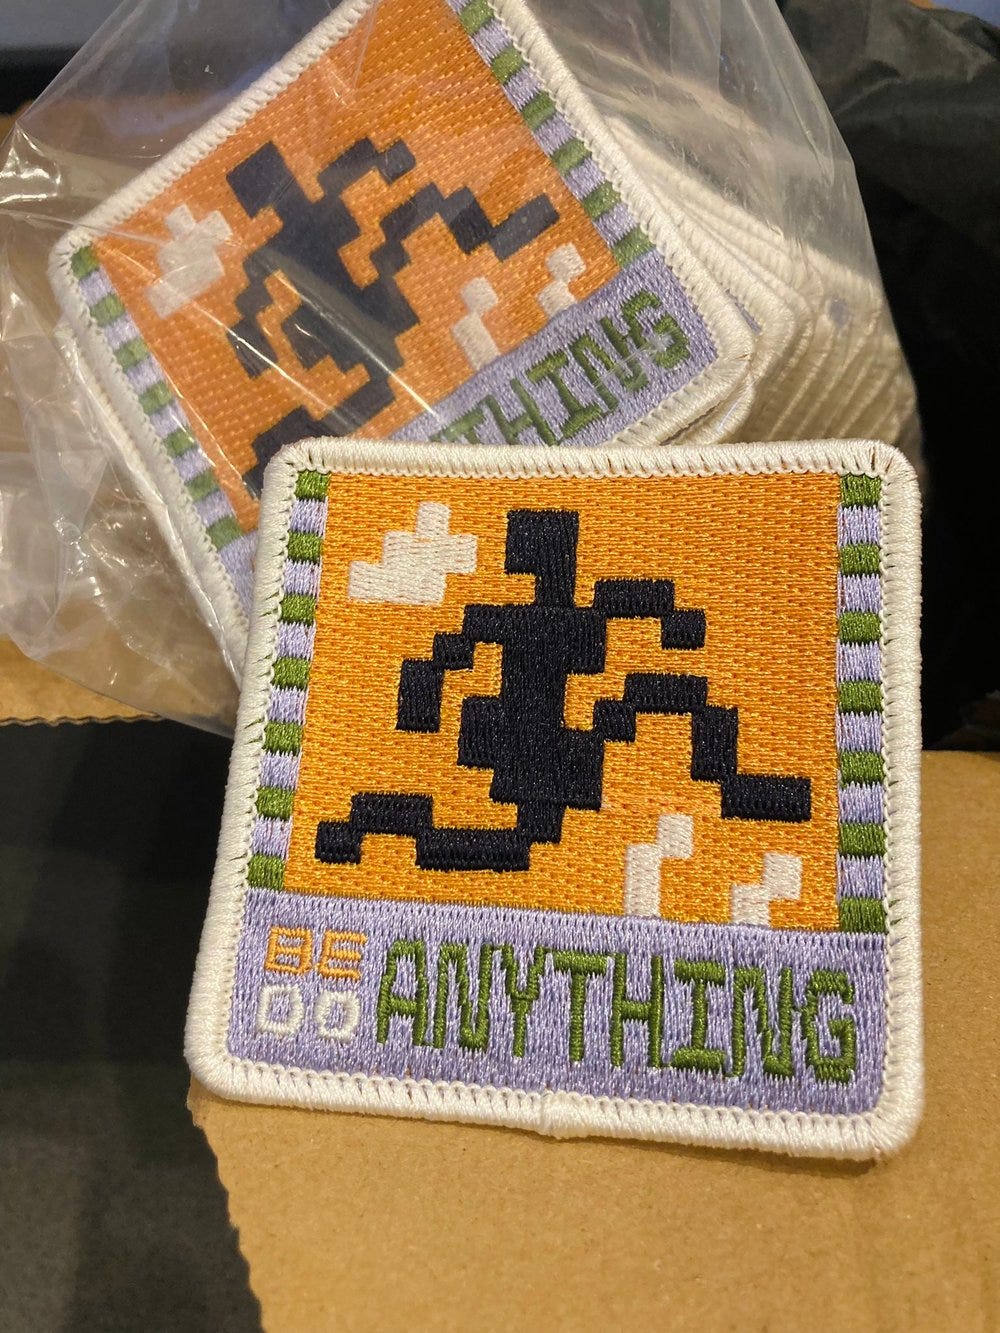 Photo of an embroidered patch that has the words "BE/DO ANYTHING"